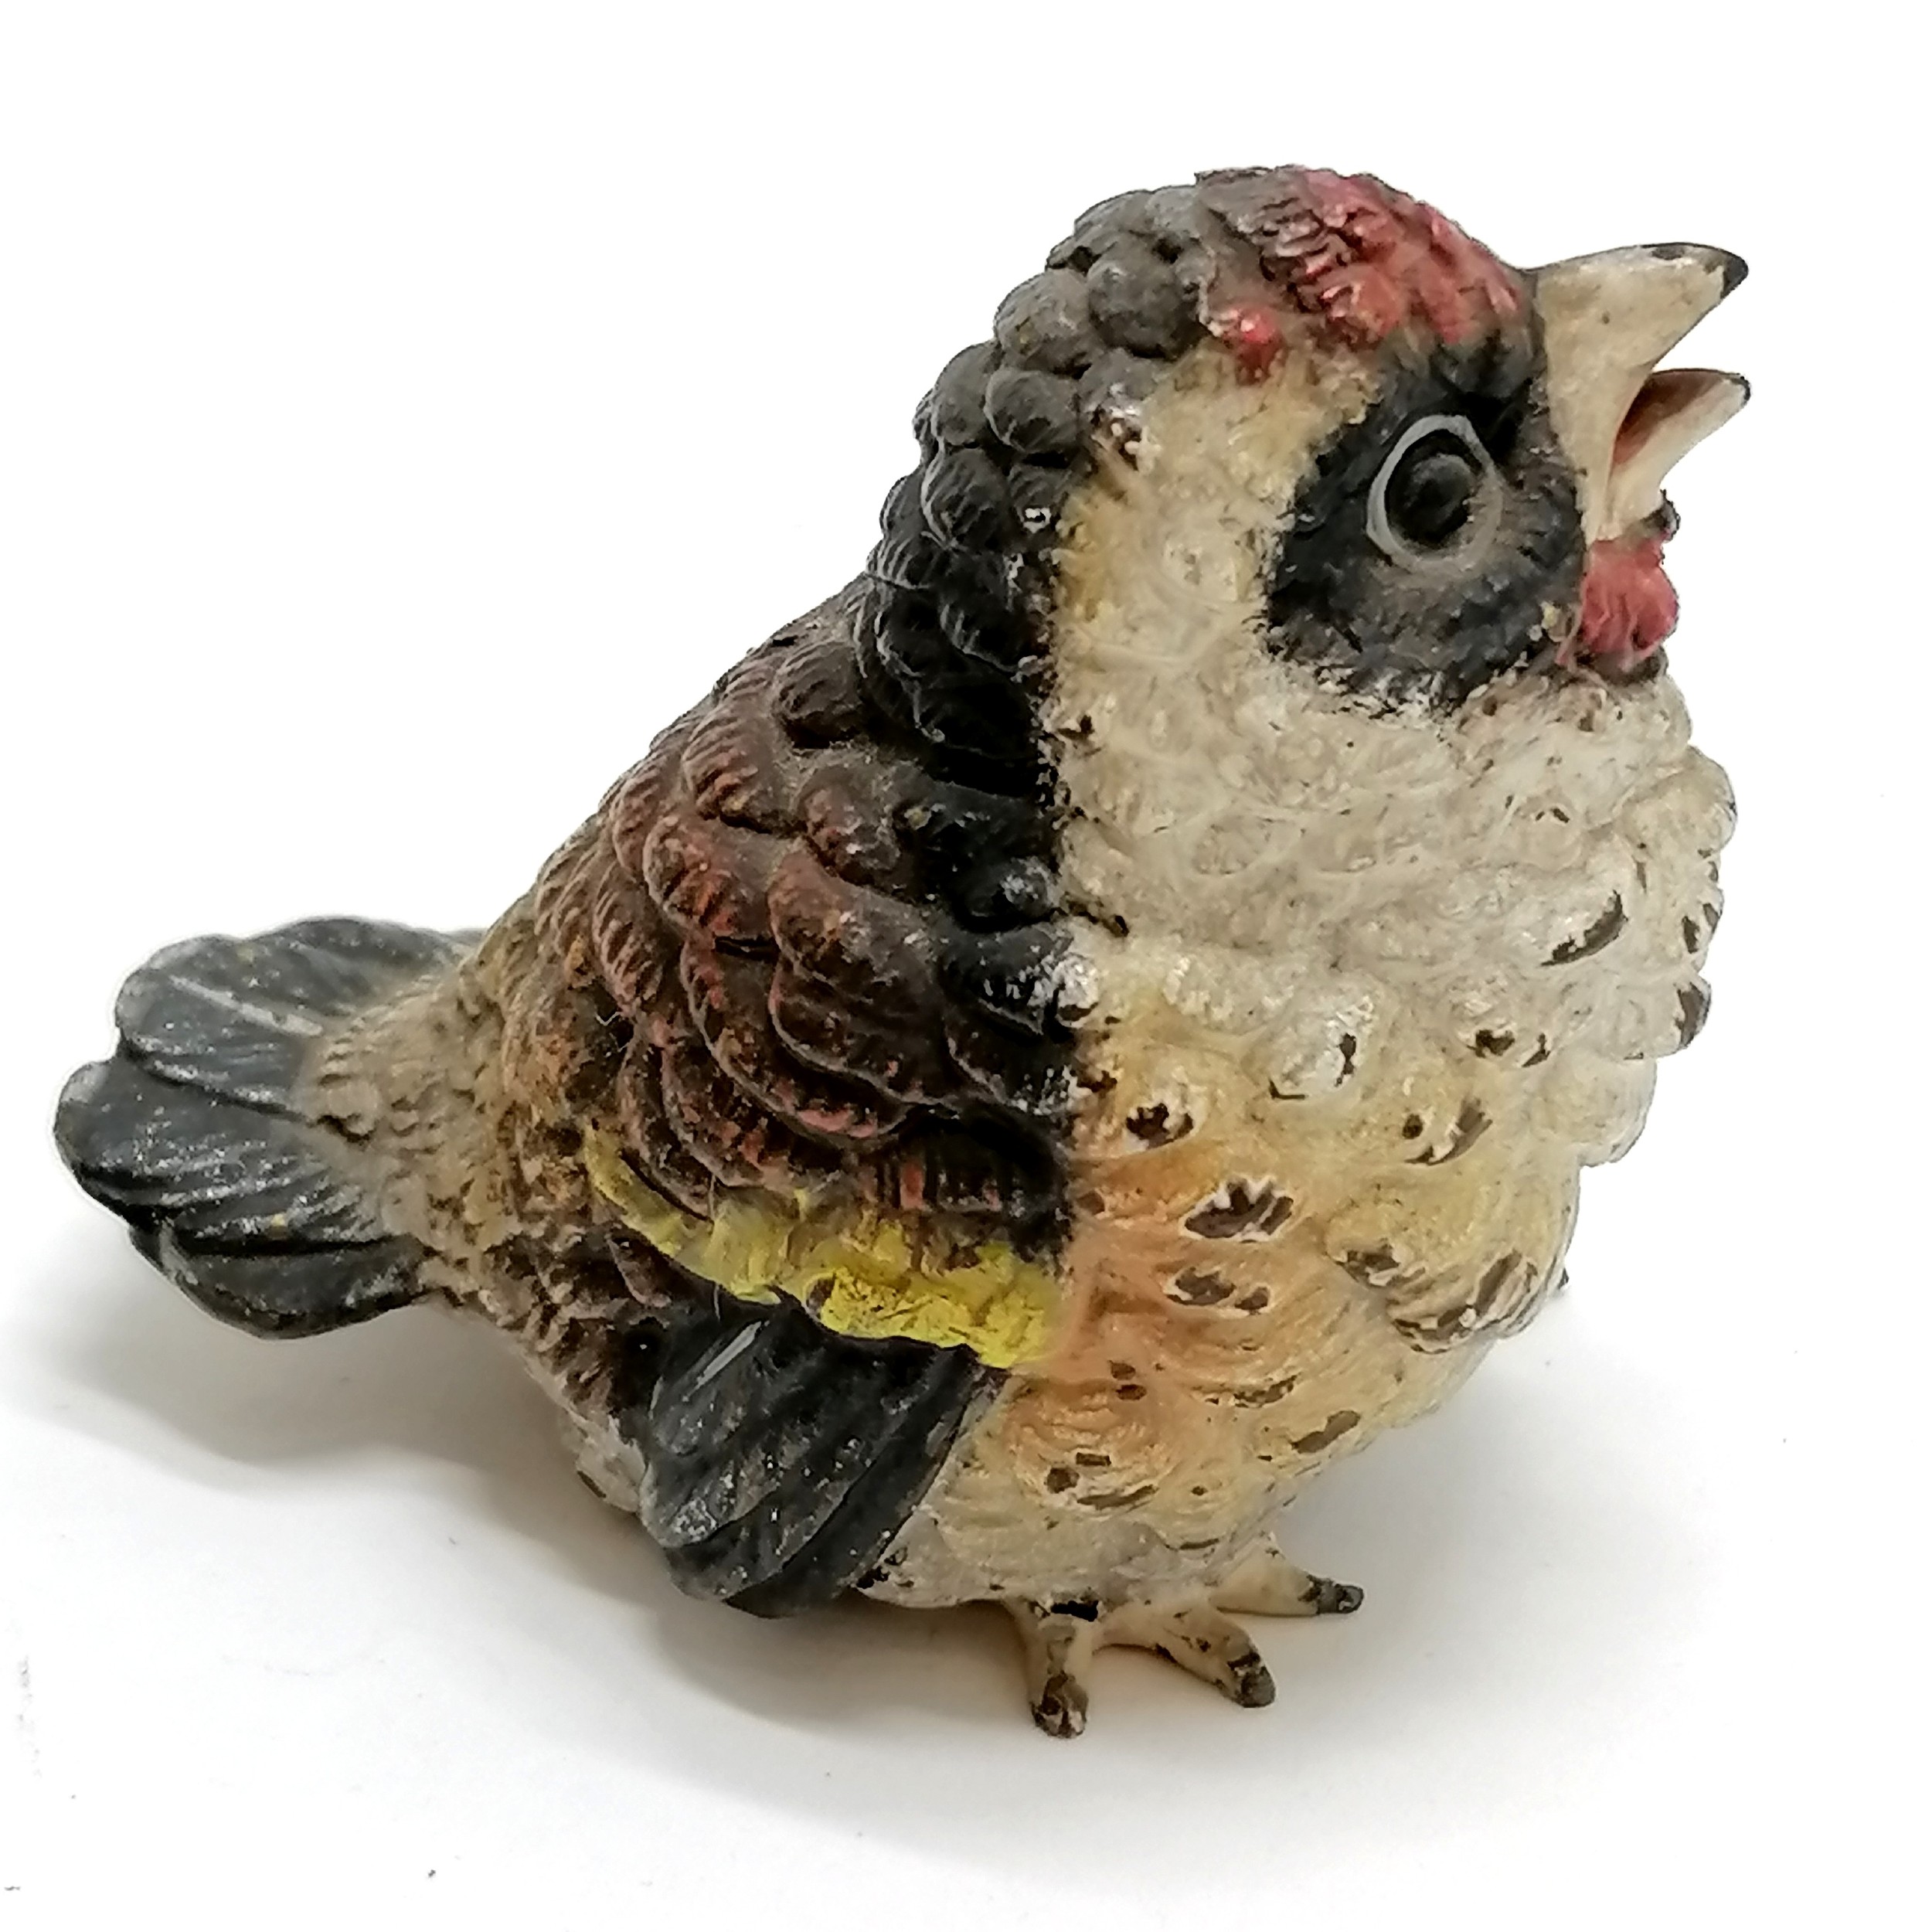 Antique Austrian cold painted bronze of a baby goldfinch - 4.5cm high (marked Austria to base) on an - Image 3 of 5